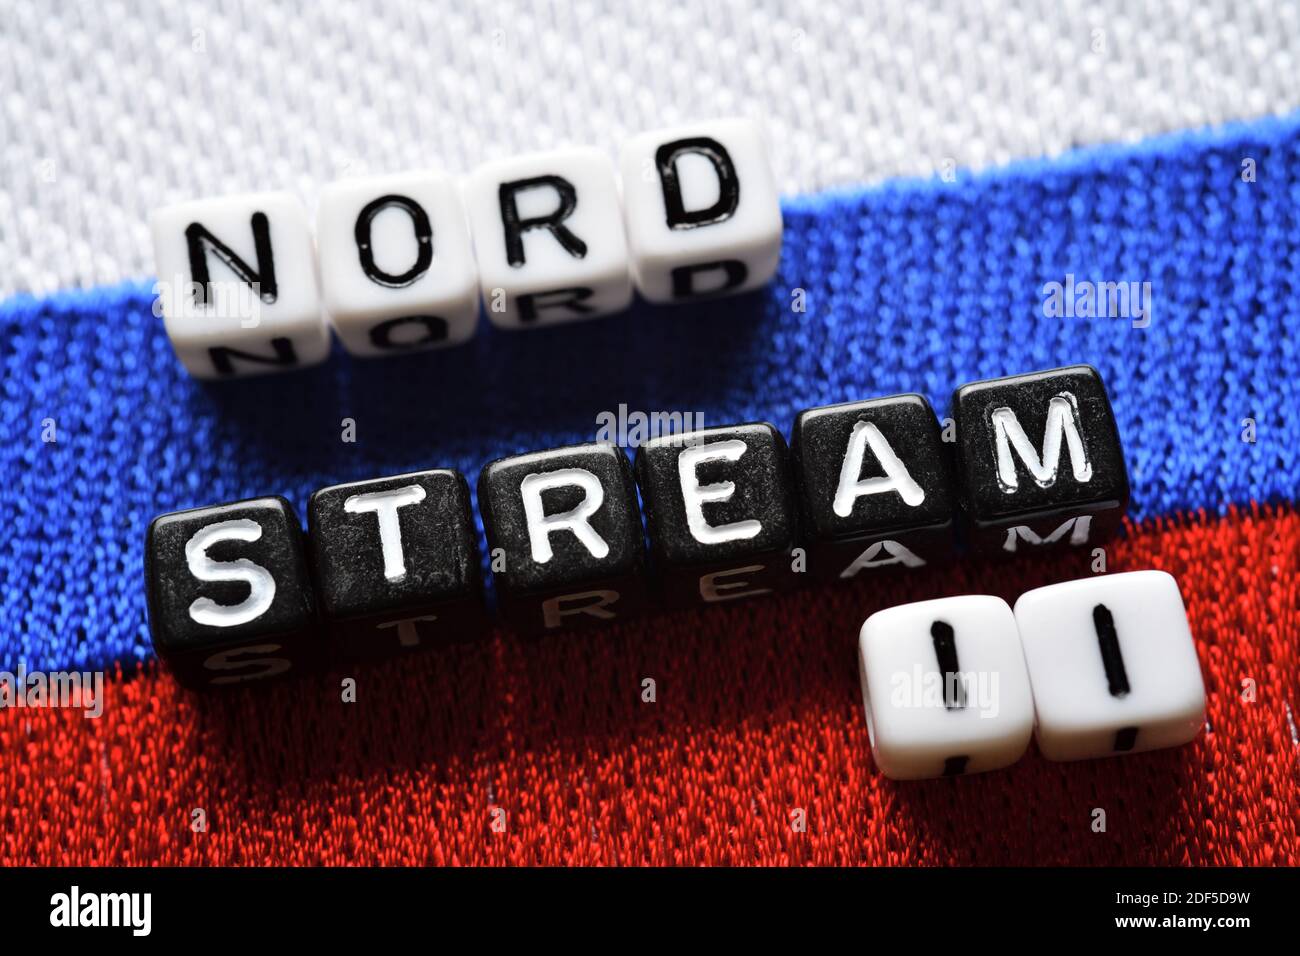 Letter Cubes Forming The Words Nord Stream 2 On The Flag Of Russia, Baltic Sea Gas Pipeline Stock Photo